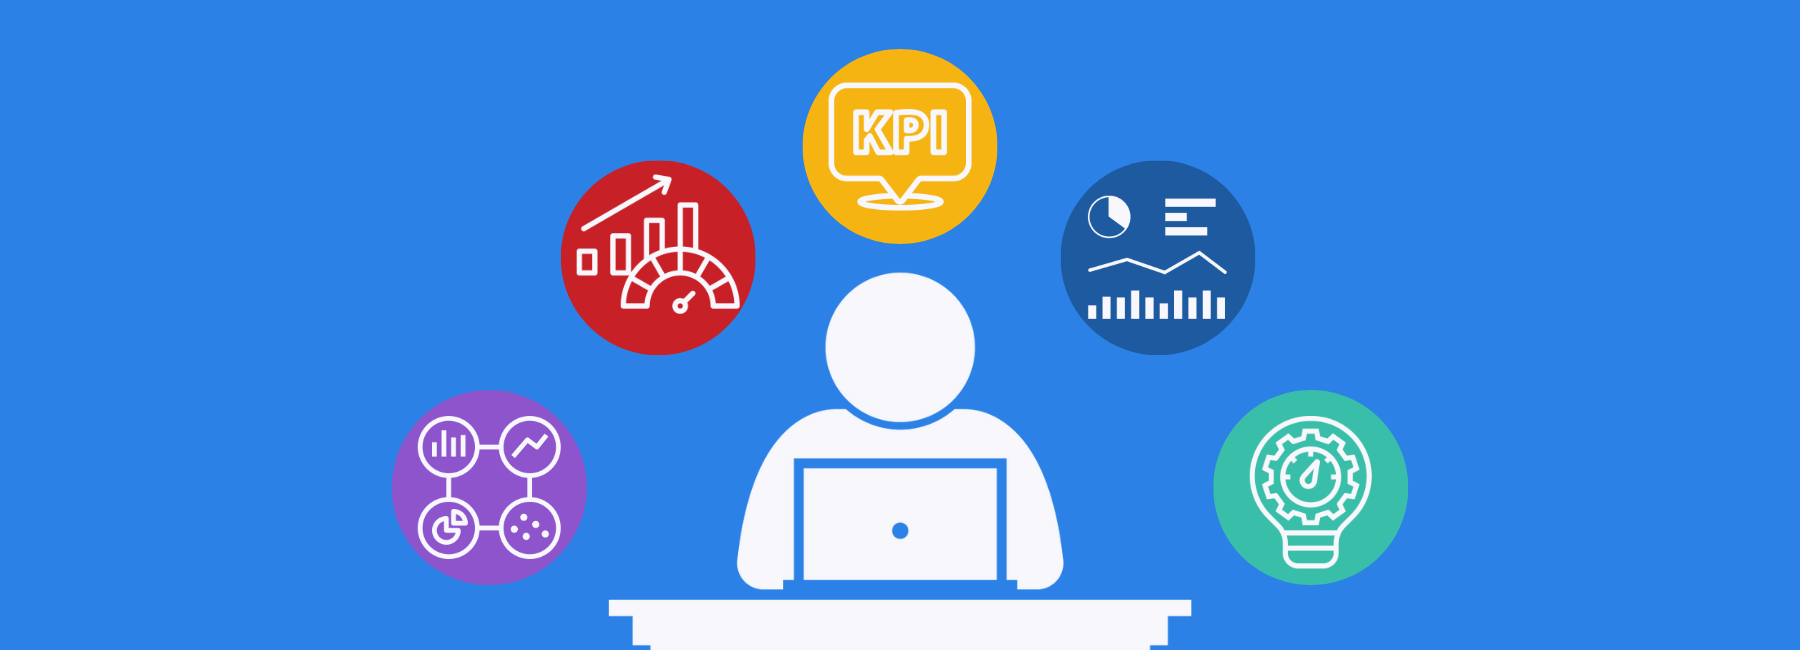 What are the best customer experience metrics and KPIs?